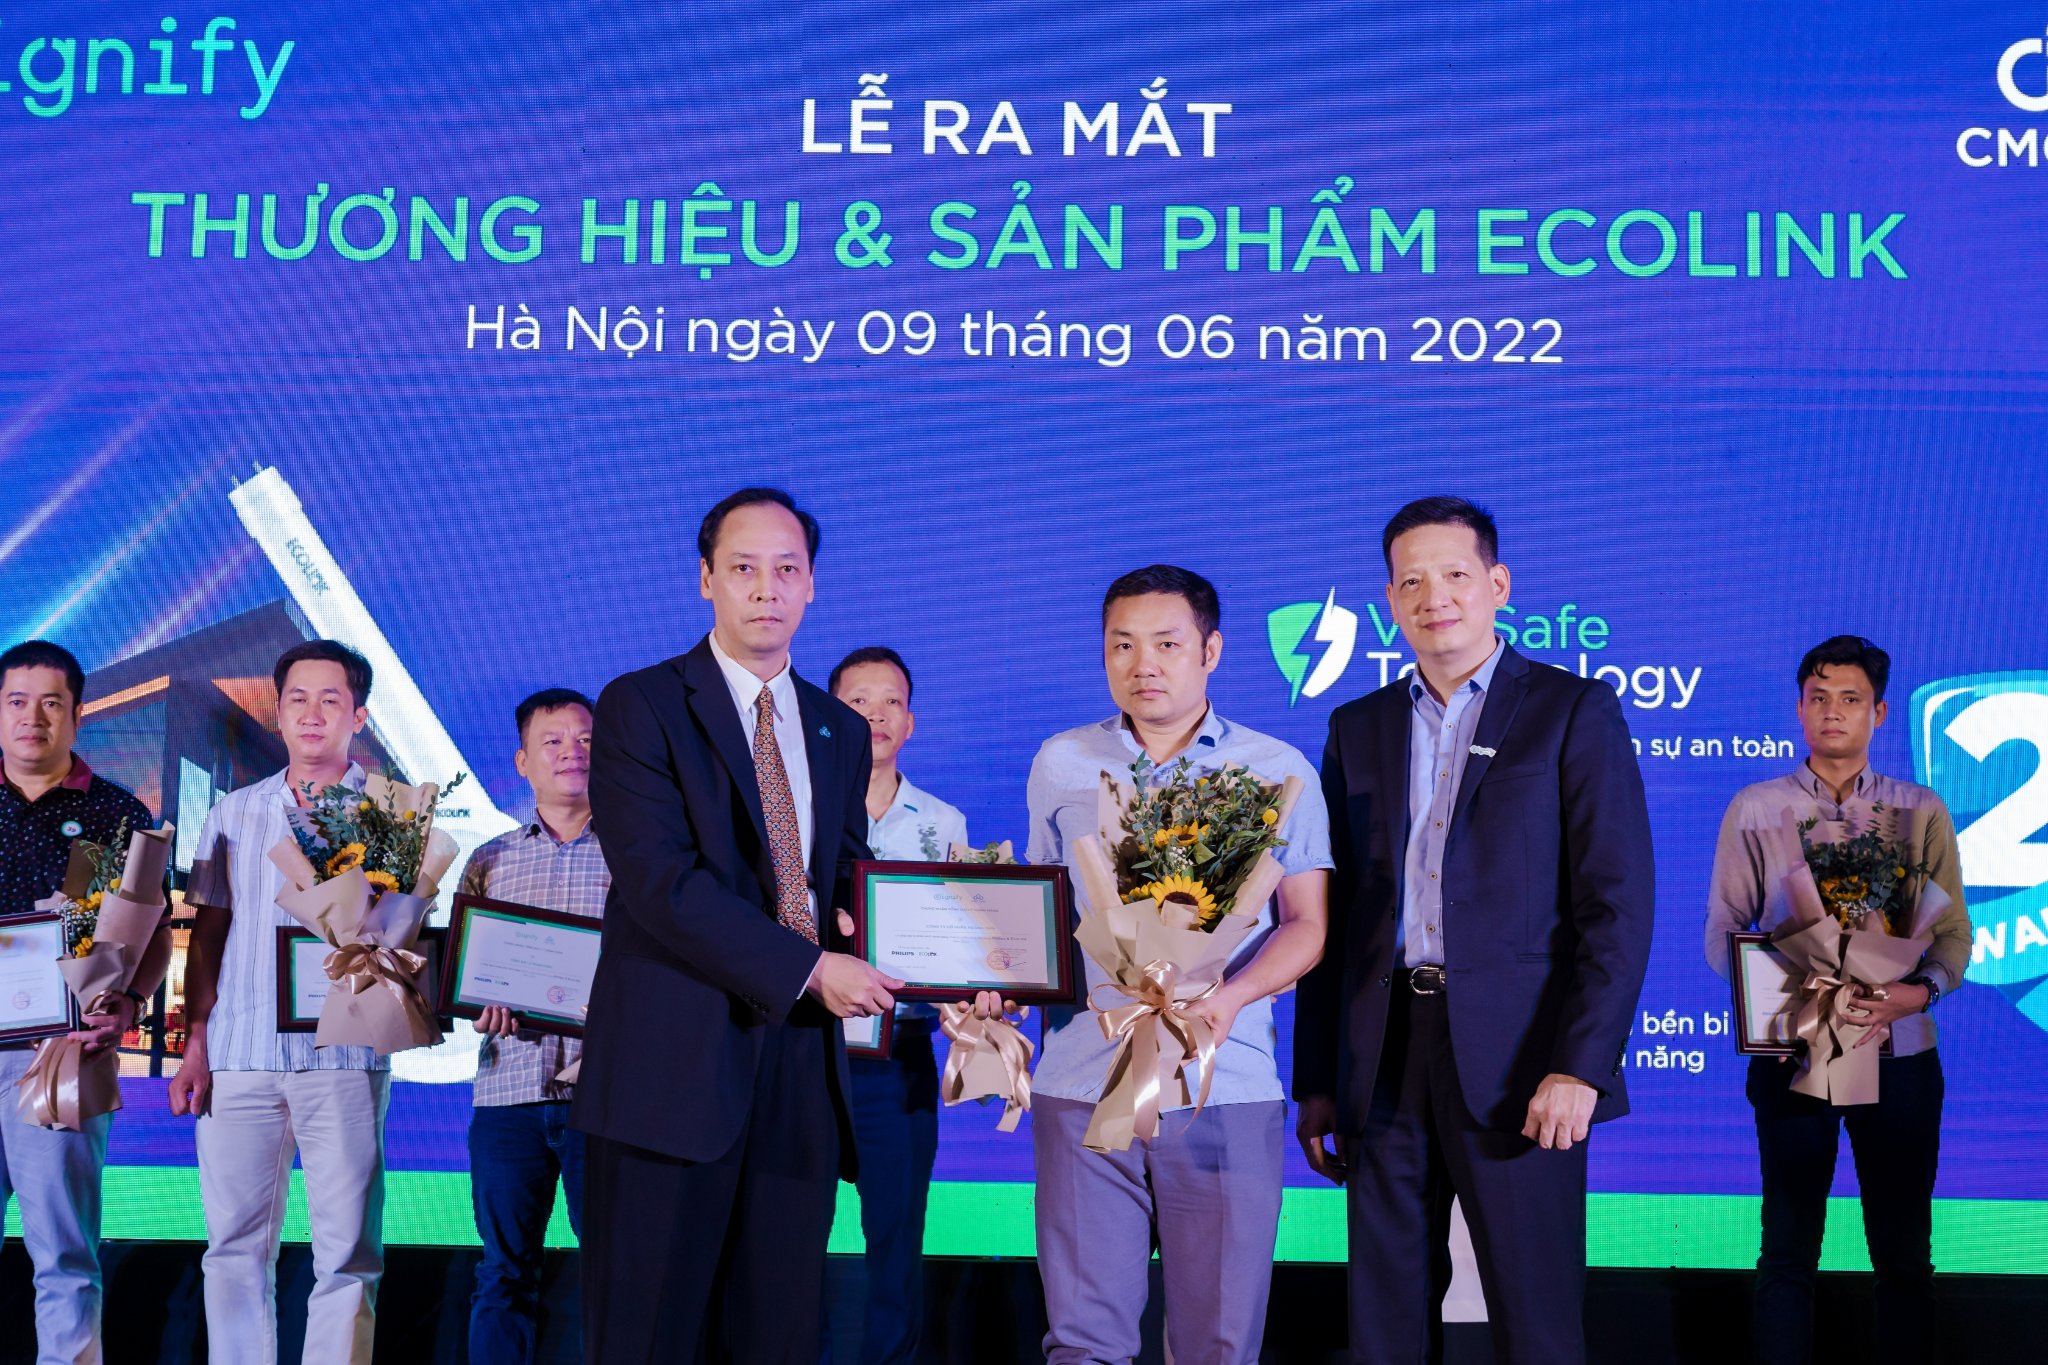 Strategic cooperation between CMS and Signify Vietnam to expand distribution of new product lines